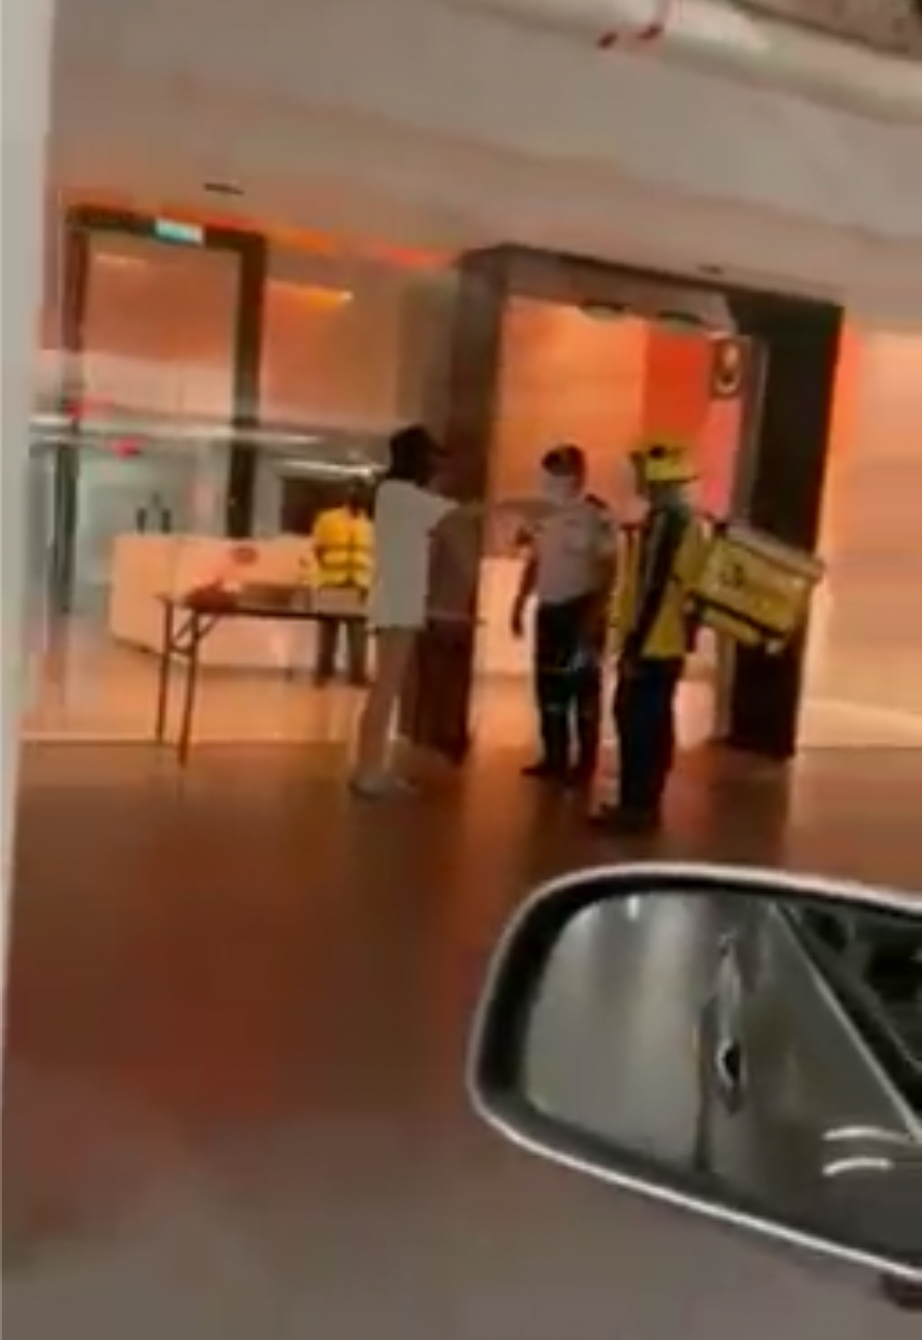 Foreigner in kl splashed bubble tea at security guard 03